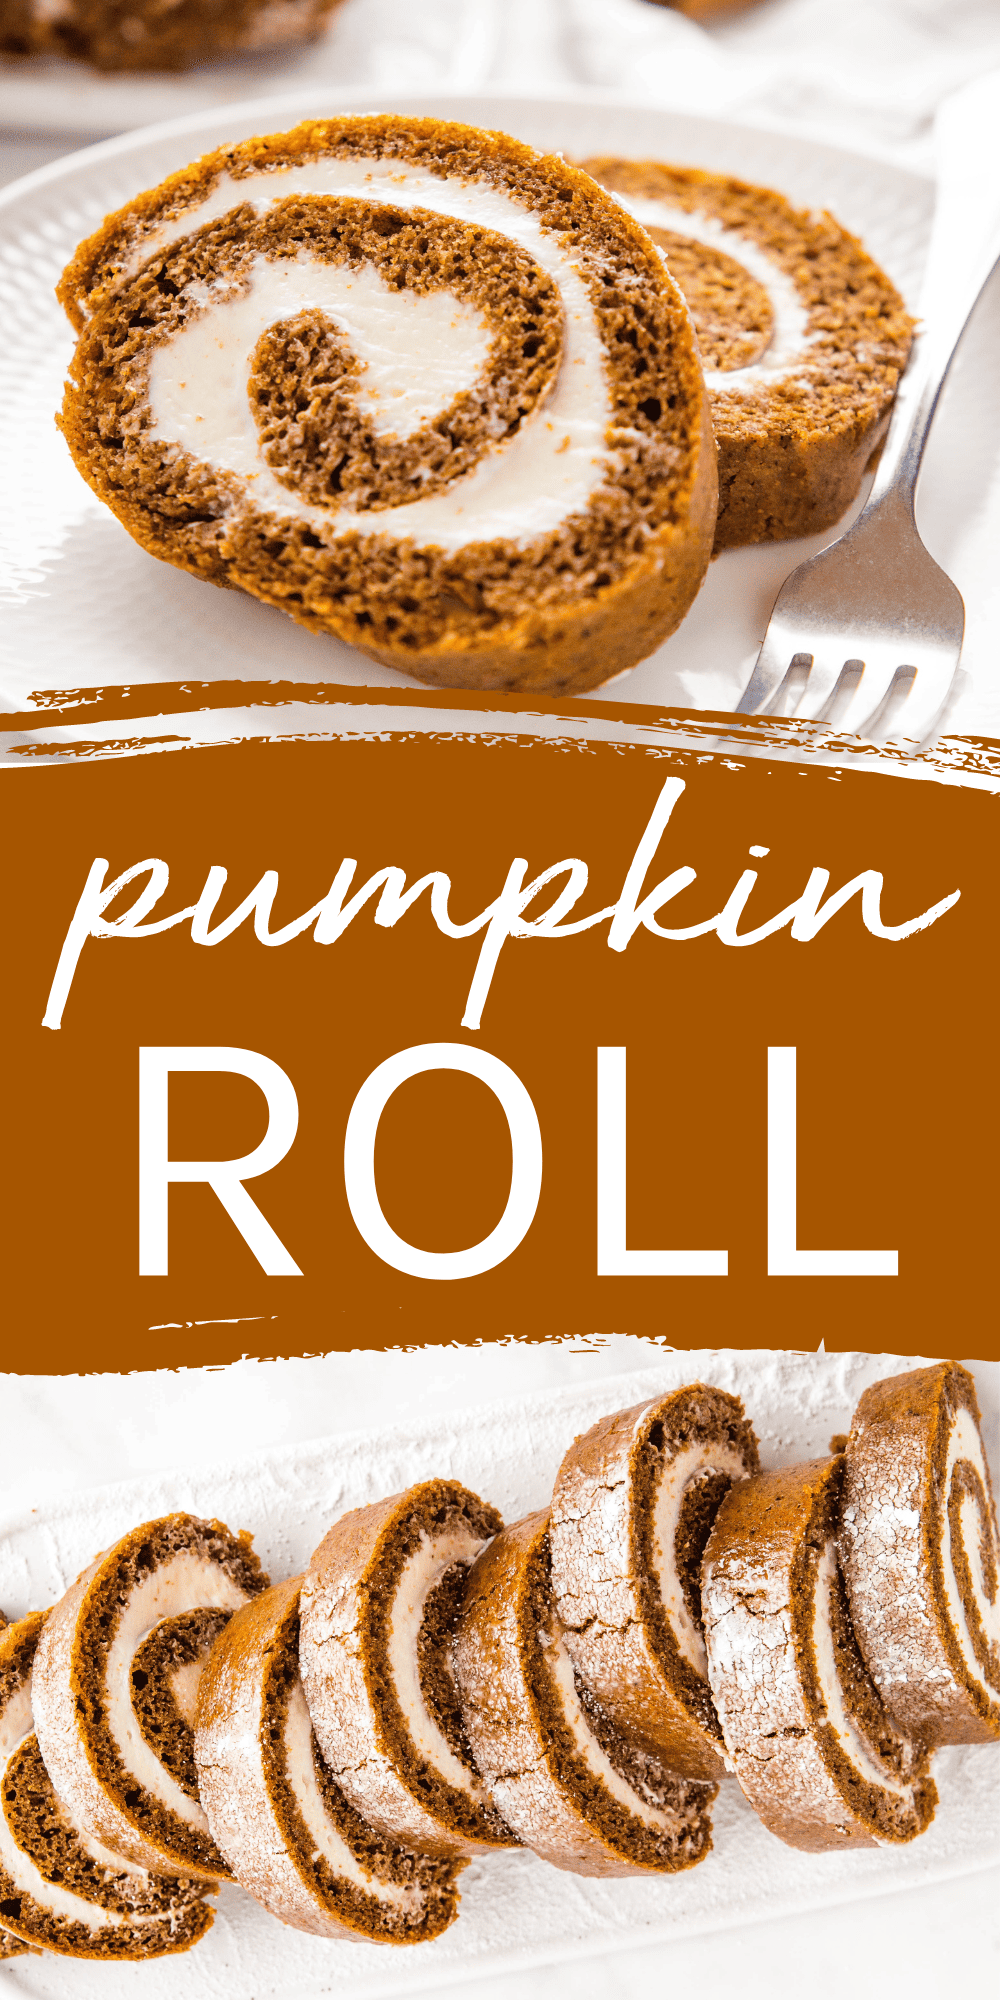 This Pumpkin Roll recipe is the perfect fall dessert made with a moist and tender pumpkin sponge cake rolled with light and fluffy cream cheese filling. An impressive homemade Pumpkin Roll made easy with pro tips and tricks! Recipe from thebusybaker.ca! #cakeroll #pumpkinroll #pumpkincakeroll #pumpkinrollcake #pumpkincake #pumpkindessert #pumkin #fallrecipe #falldessert #easyfalldessert #easypumkinrecipe via @busybakerblog